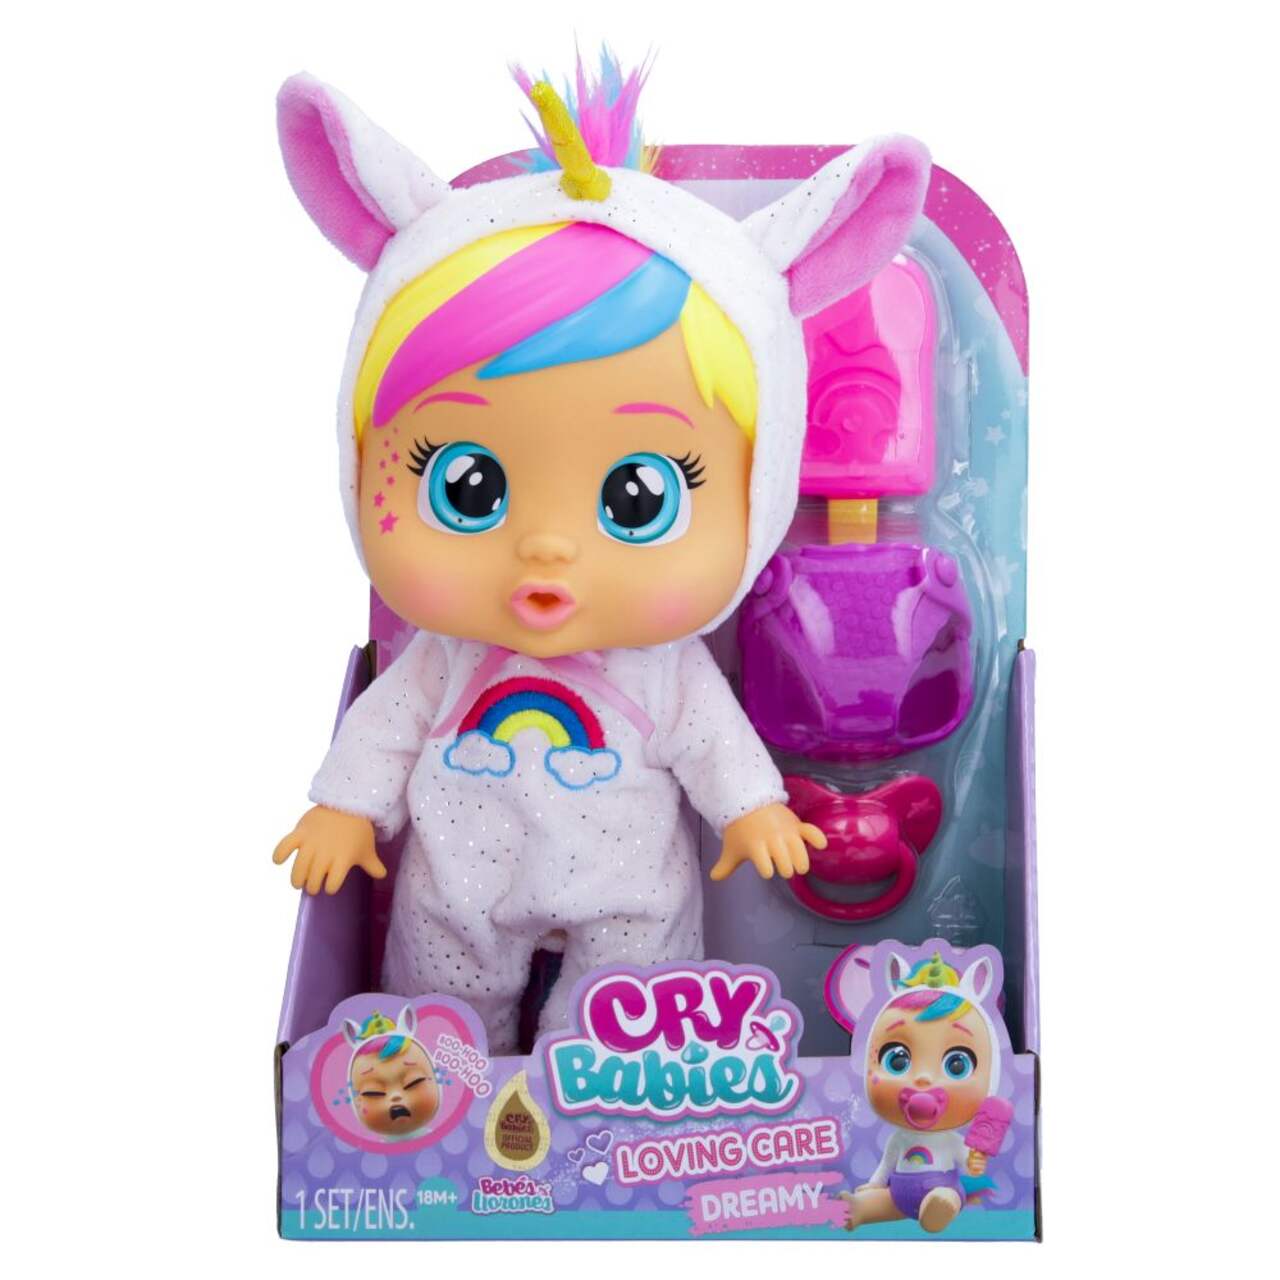 Cry Babies Loving Care Collectible Doll, Assorted Styles, Ages 18